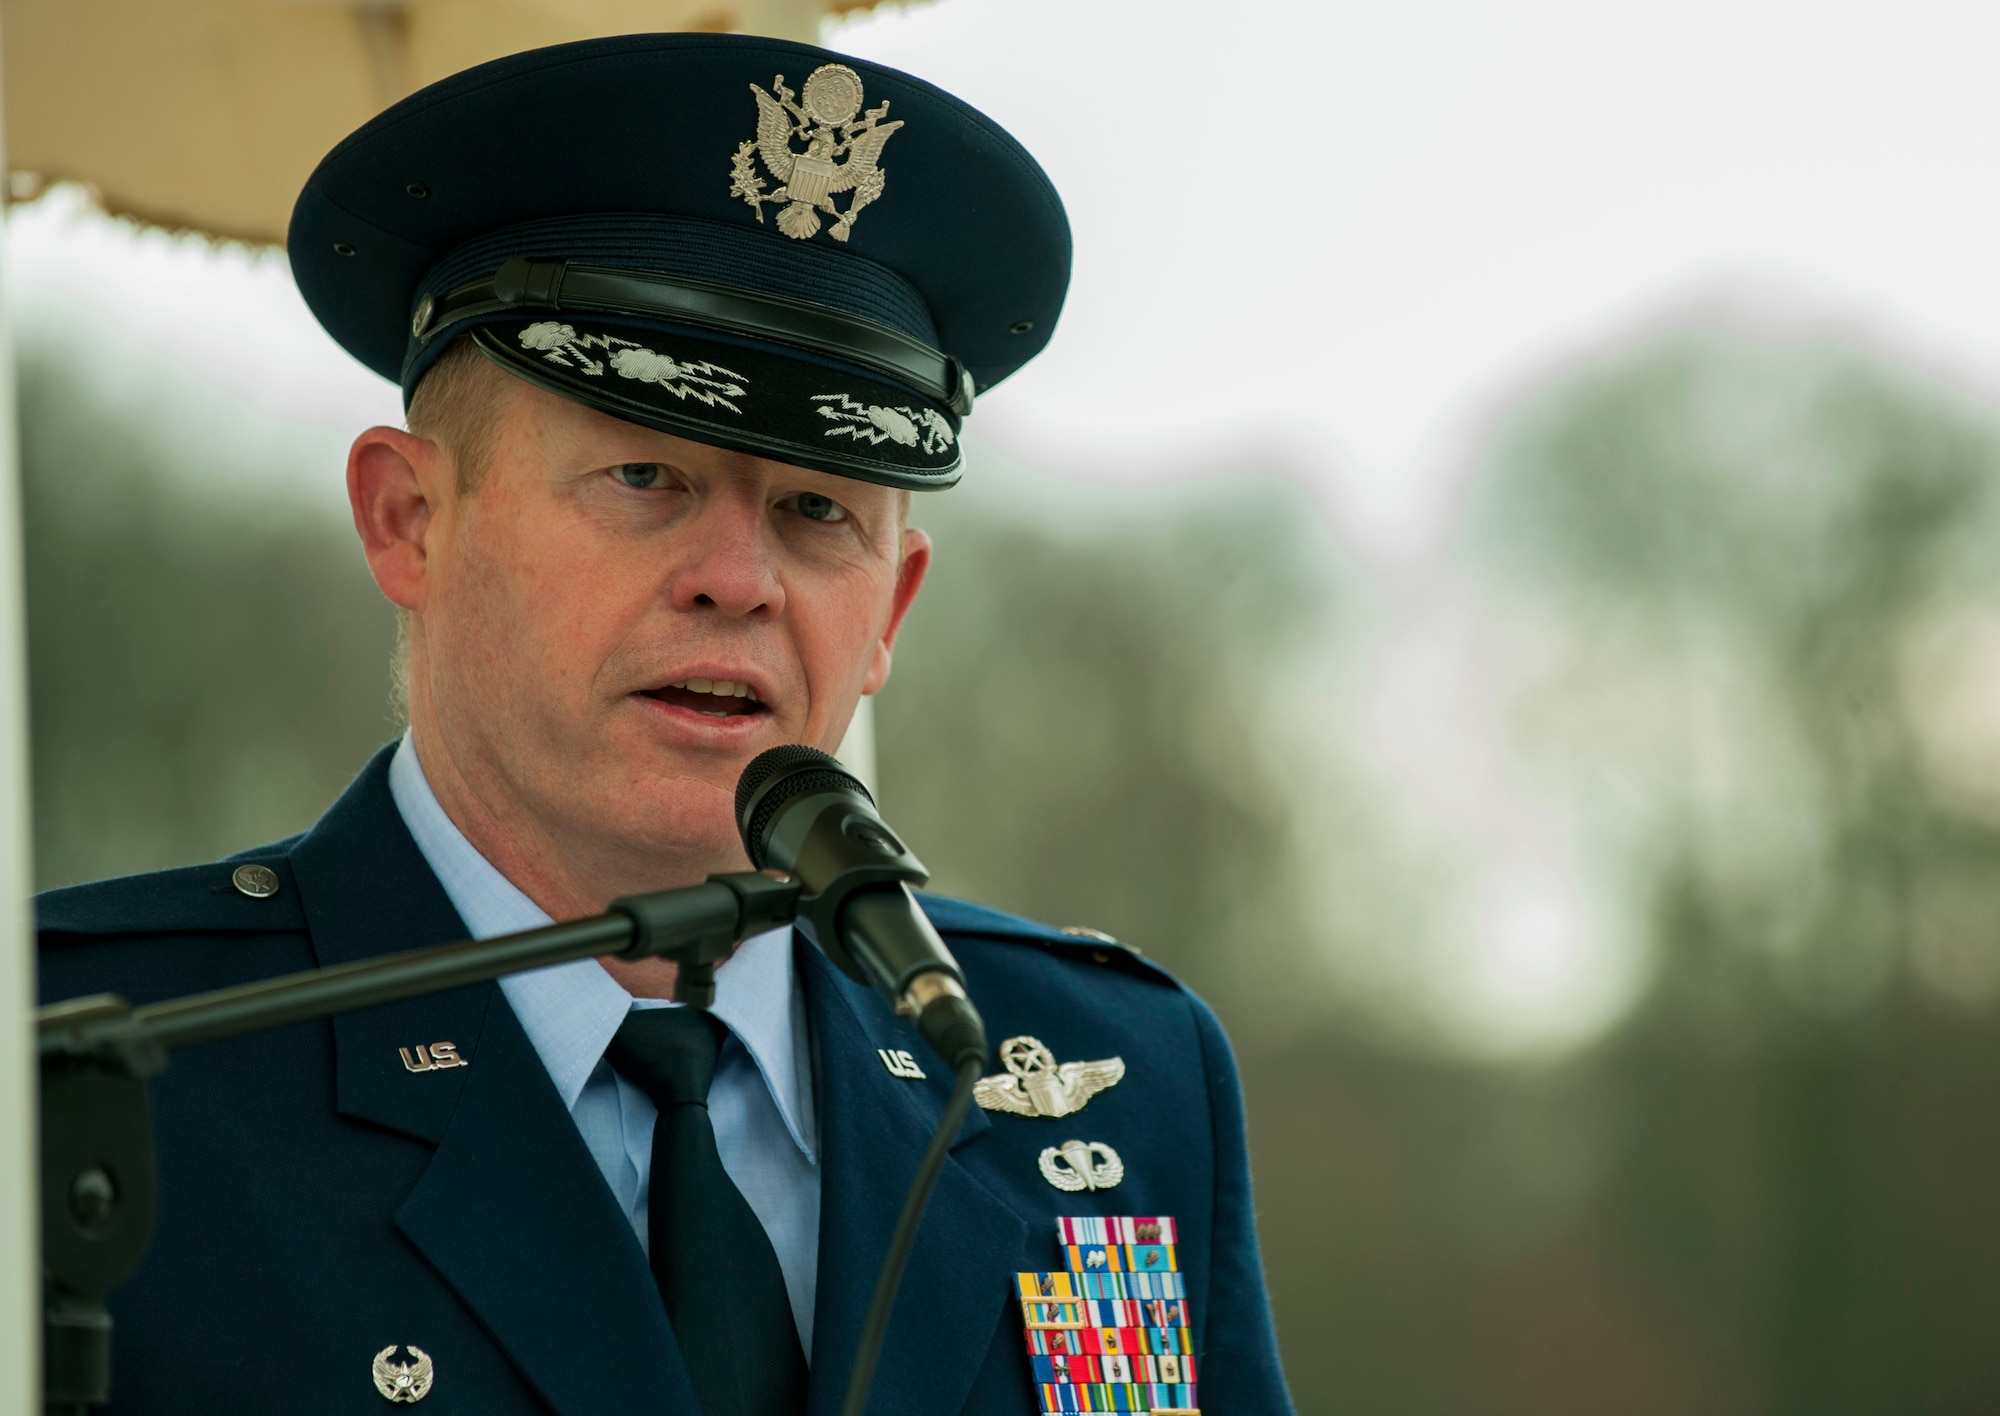 U.S. Air Force Col. Joe McFall, 52nd Fighter Wing commander, gives a speech during a wreath-laying ceremony at the Luxembourg American Cemetery and Memorial in Hamm, Luxembourg City, Luxembourg, Nov. 11, 2015. McFall and Alison Shorter-Lawrence, Charge d’ Affaires of the U.S. Embassy in Luxembourg, spoke at the ceremony, honoring, recognizing and thanking all veterans who’ve served their country. (U.S. Air Force photo by Airman 1st Class Timothy Kim/Released)